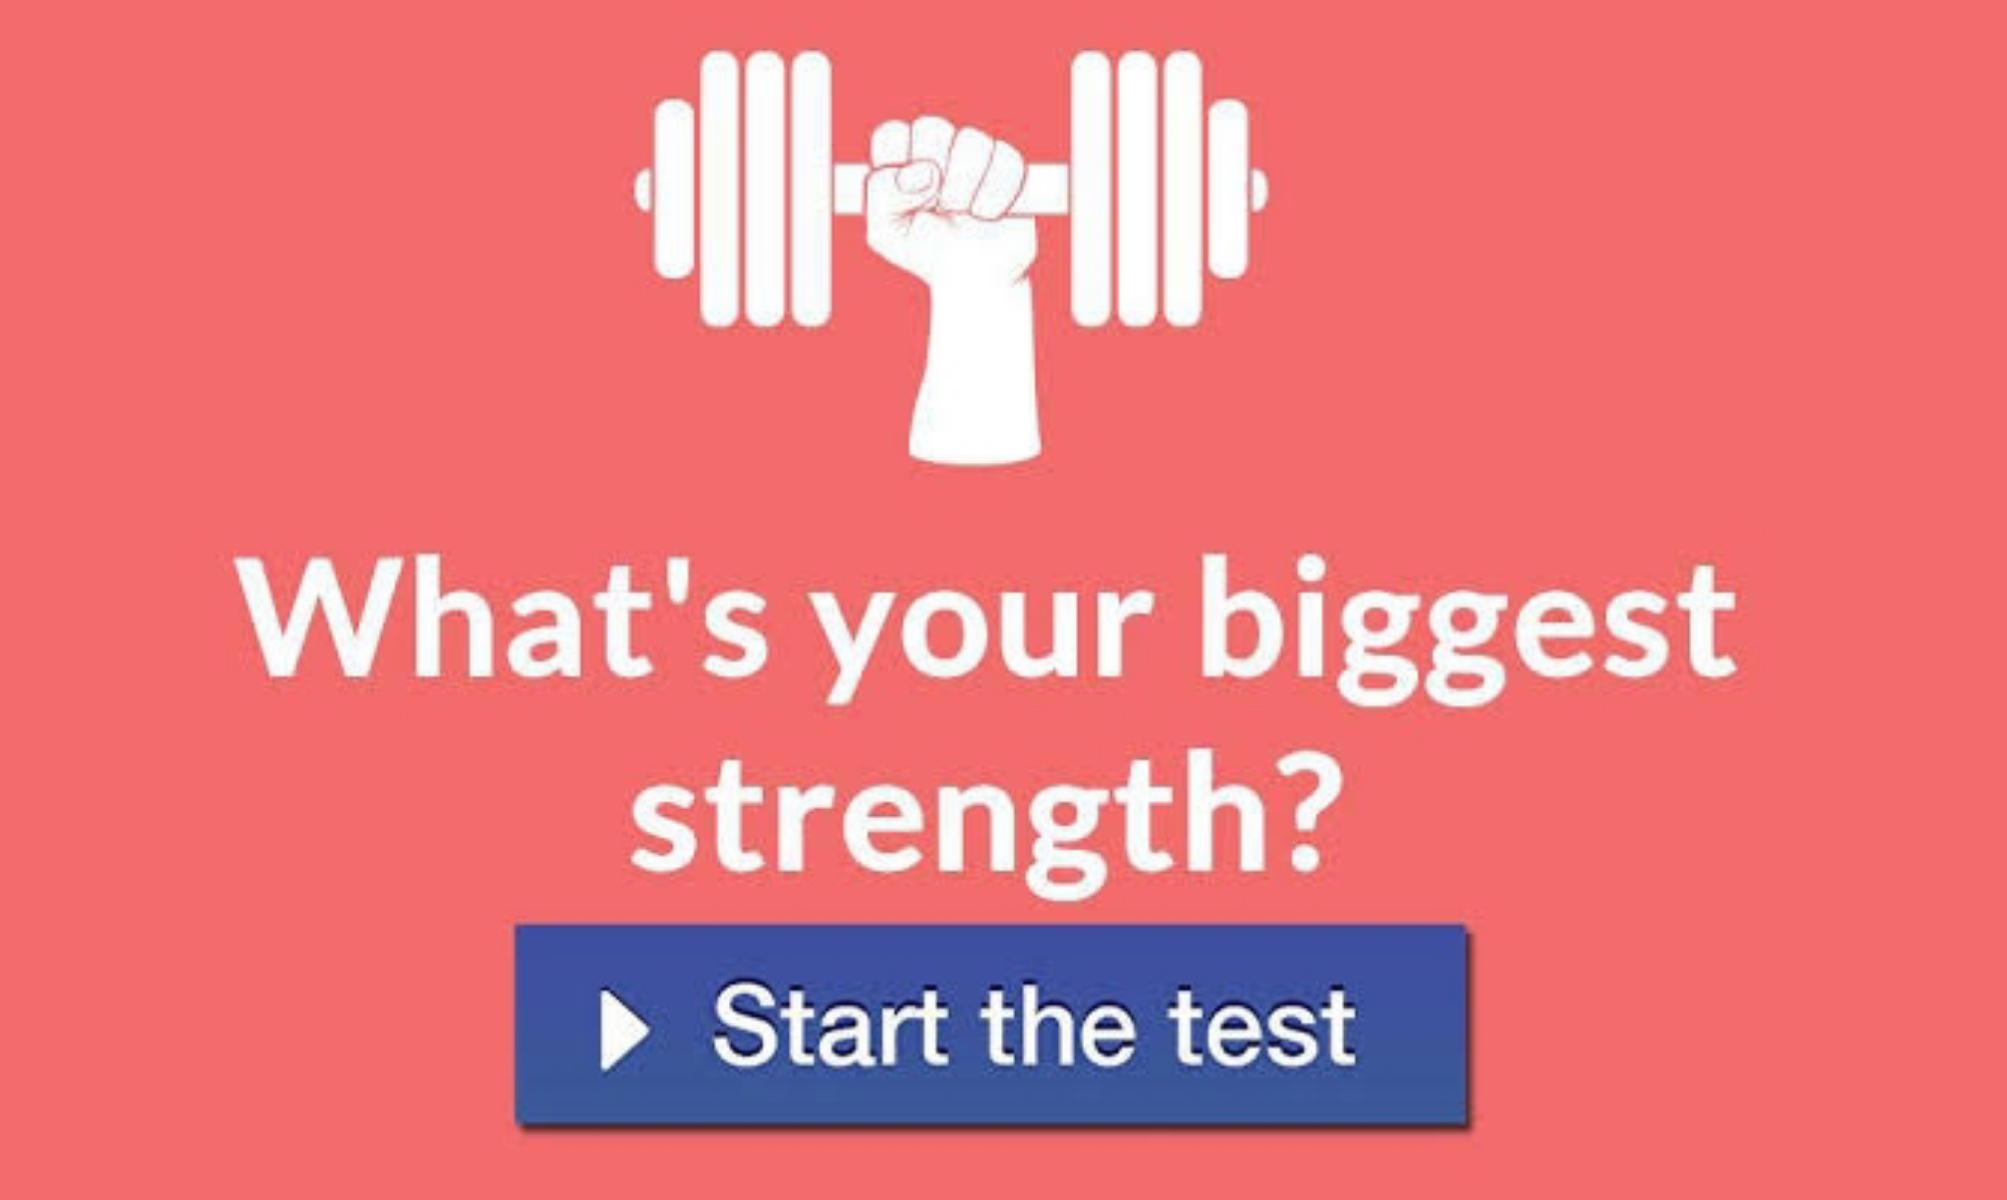 3) Tell me about your biggest strengths? 